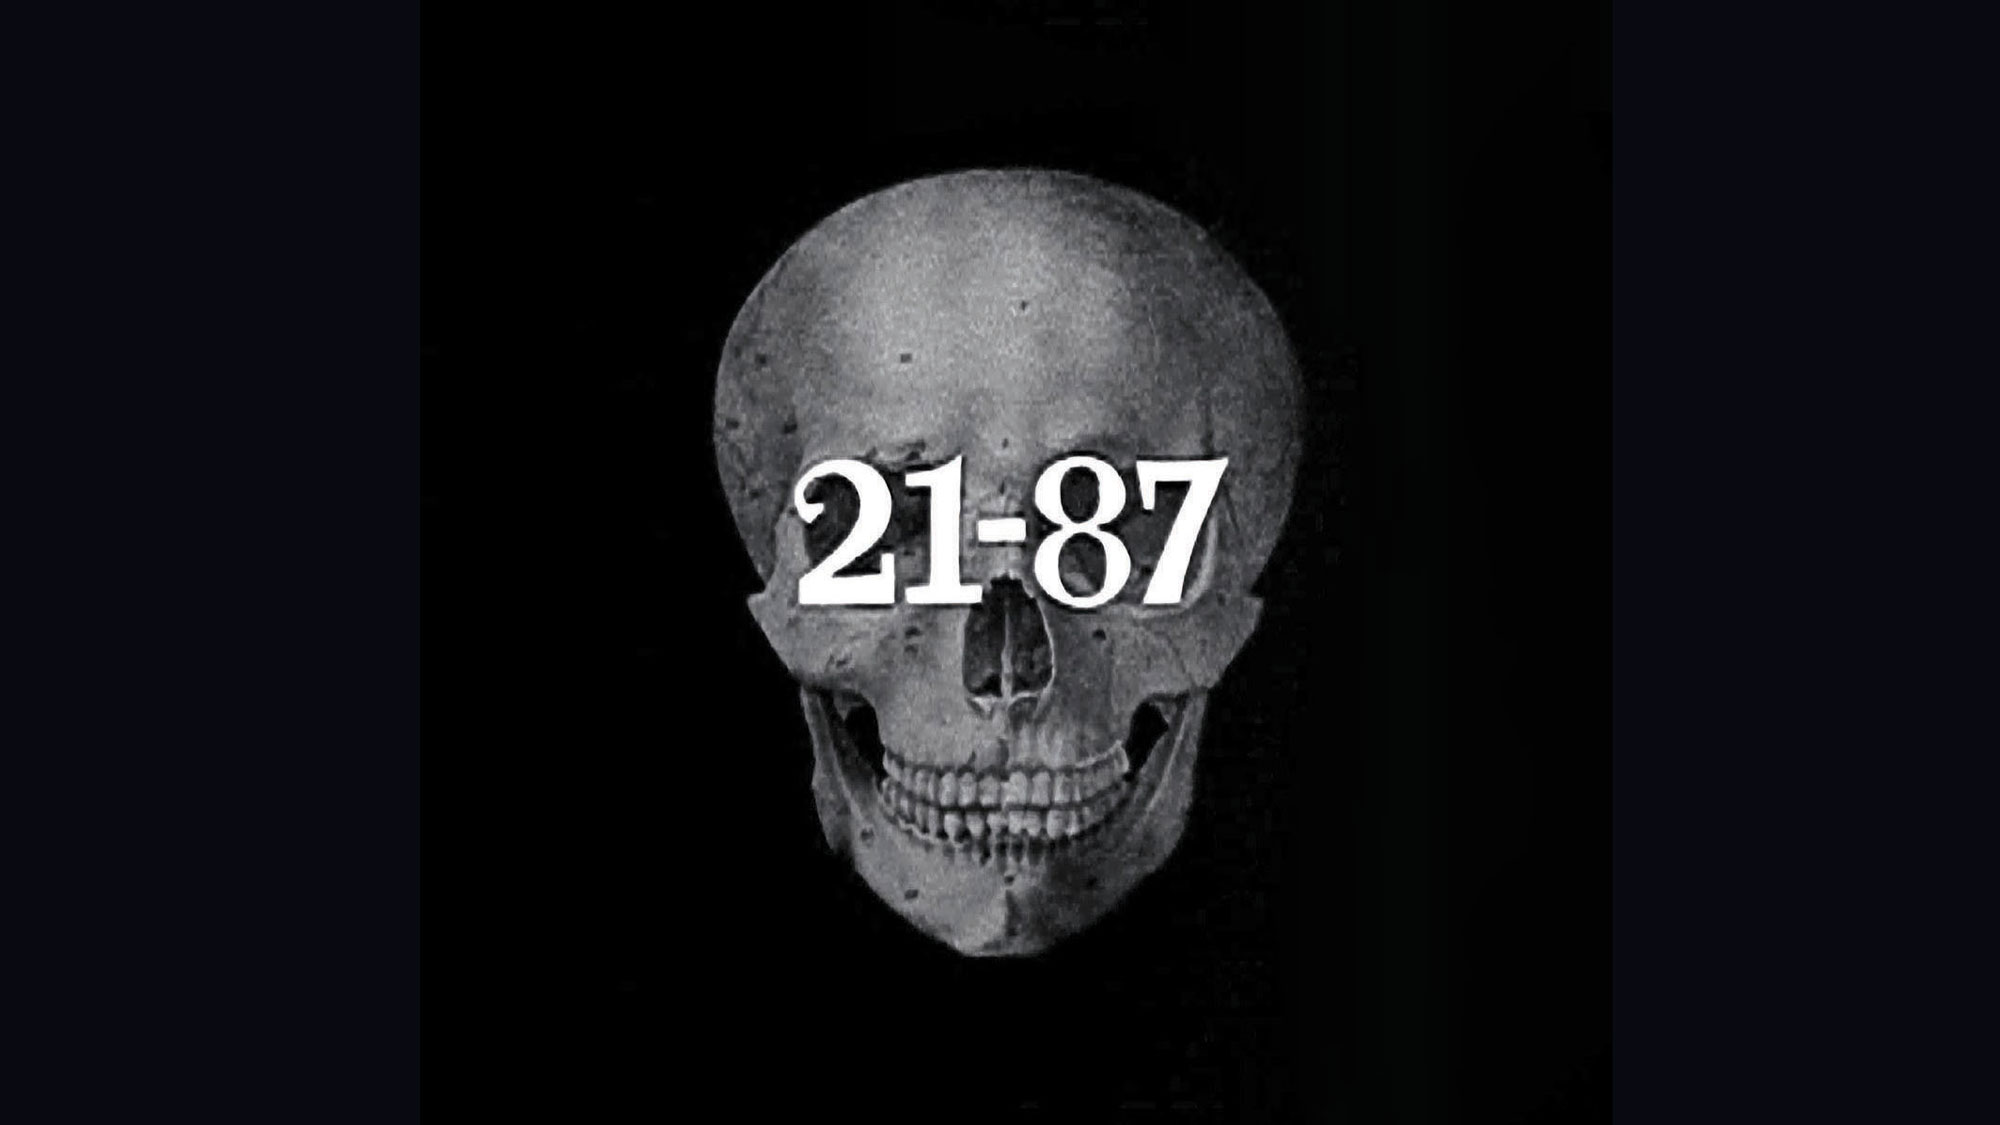 An illustration of a human skull facing forward with the numbers "21-87: across the eyes in white bold font. 